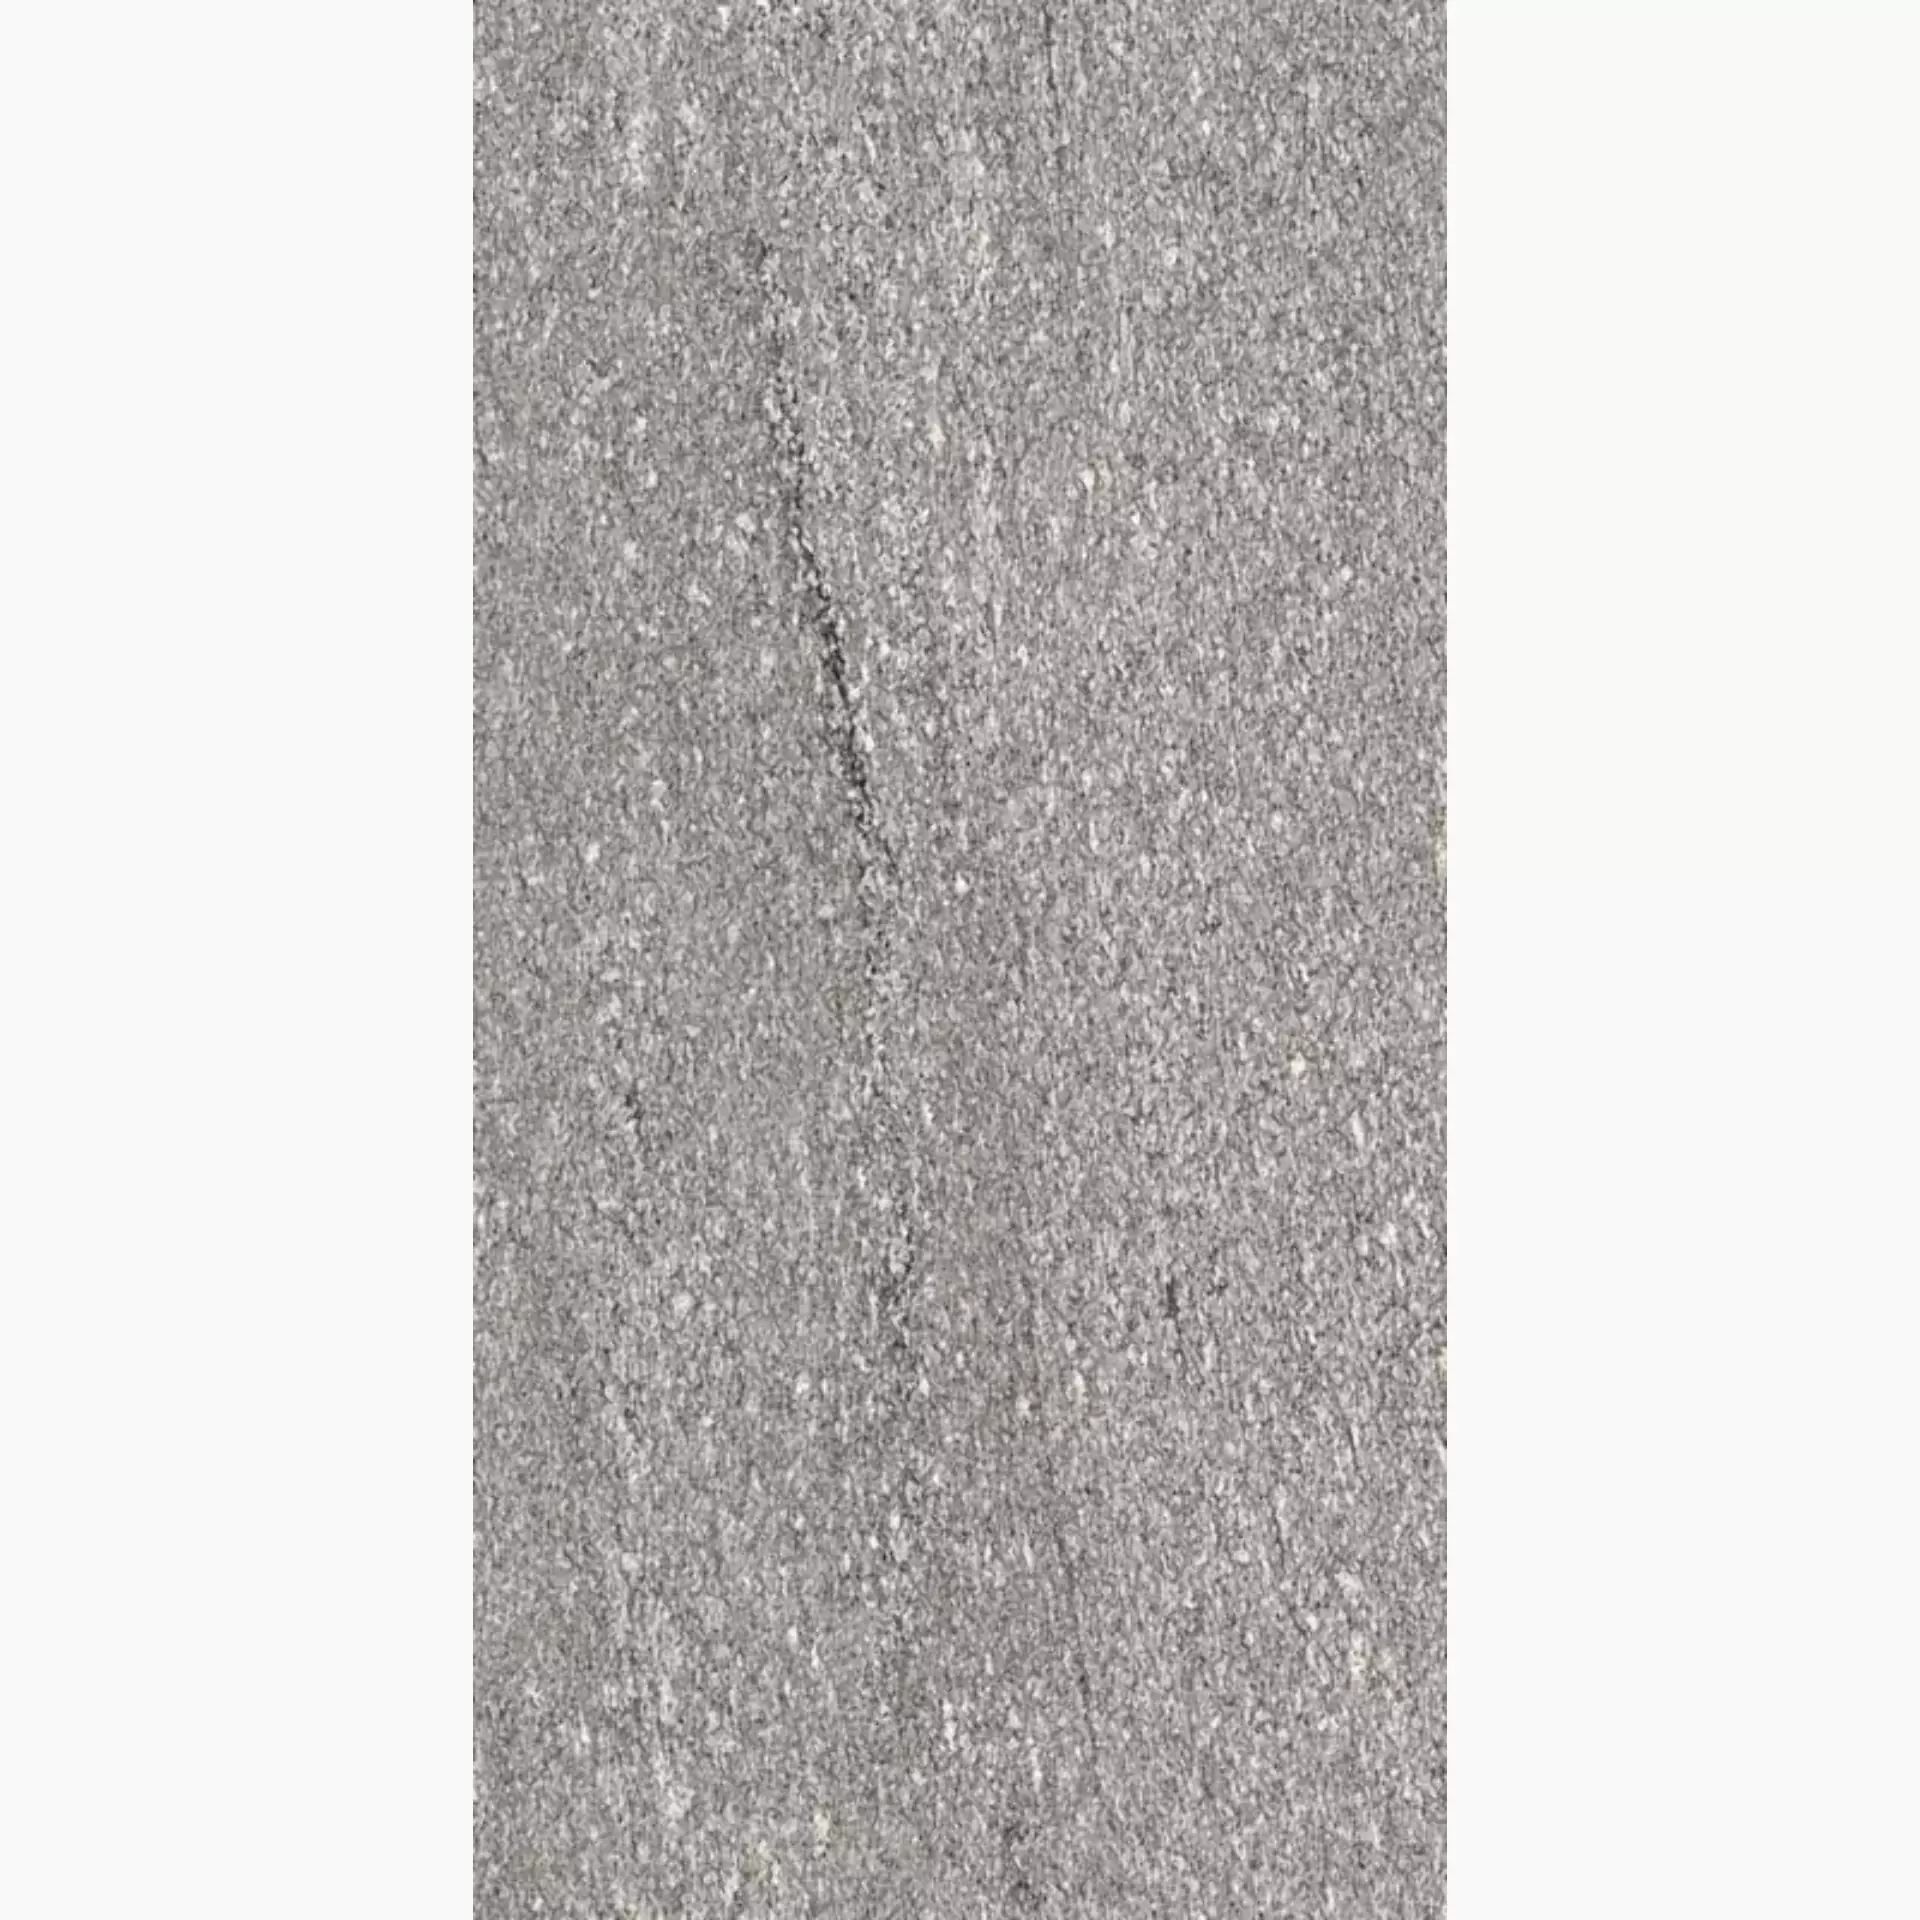 Sant Agostino Unionstone London Grey Natural CSALOGRY12 60x120cm rectified 10mm